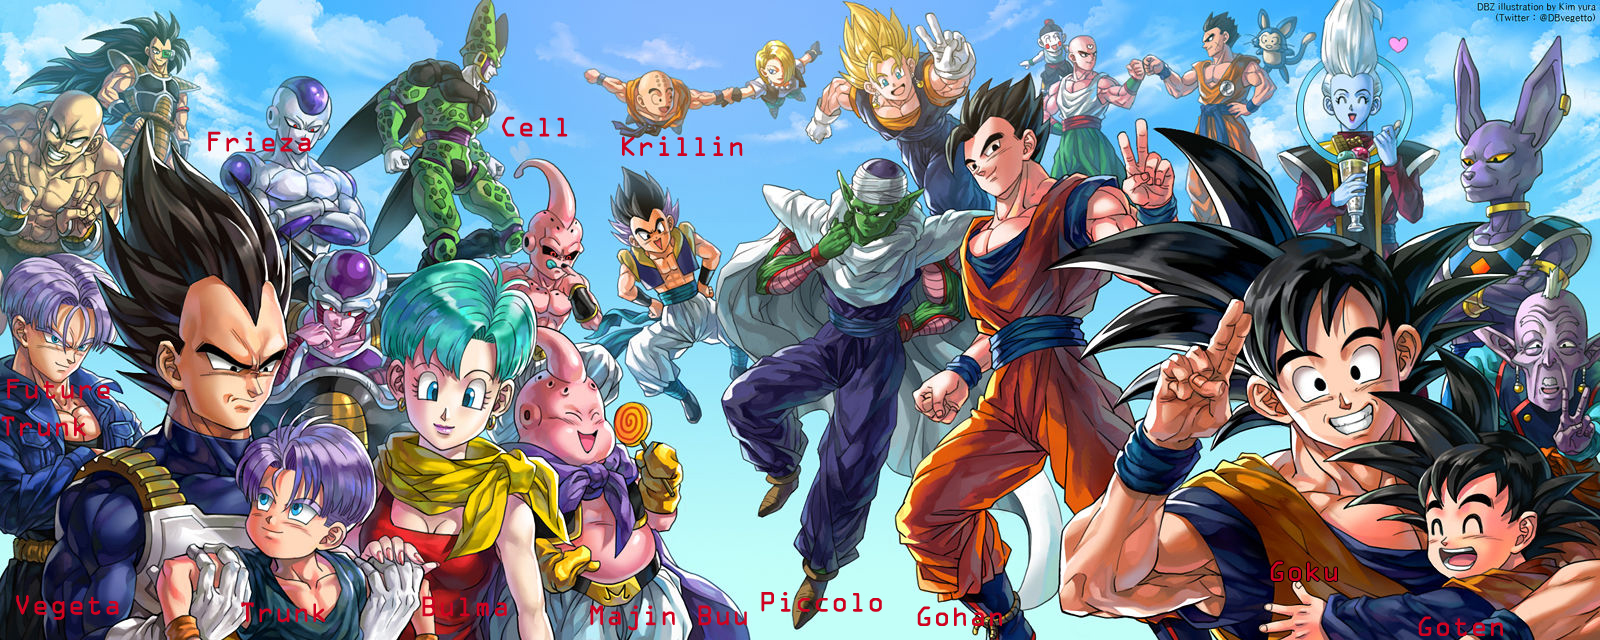 Dragon Ball Z Characters Names And Picture Wallpaper. Wallpaper Download. High Resolution Wallpaper